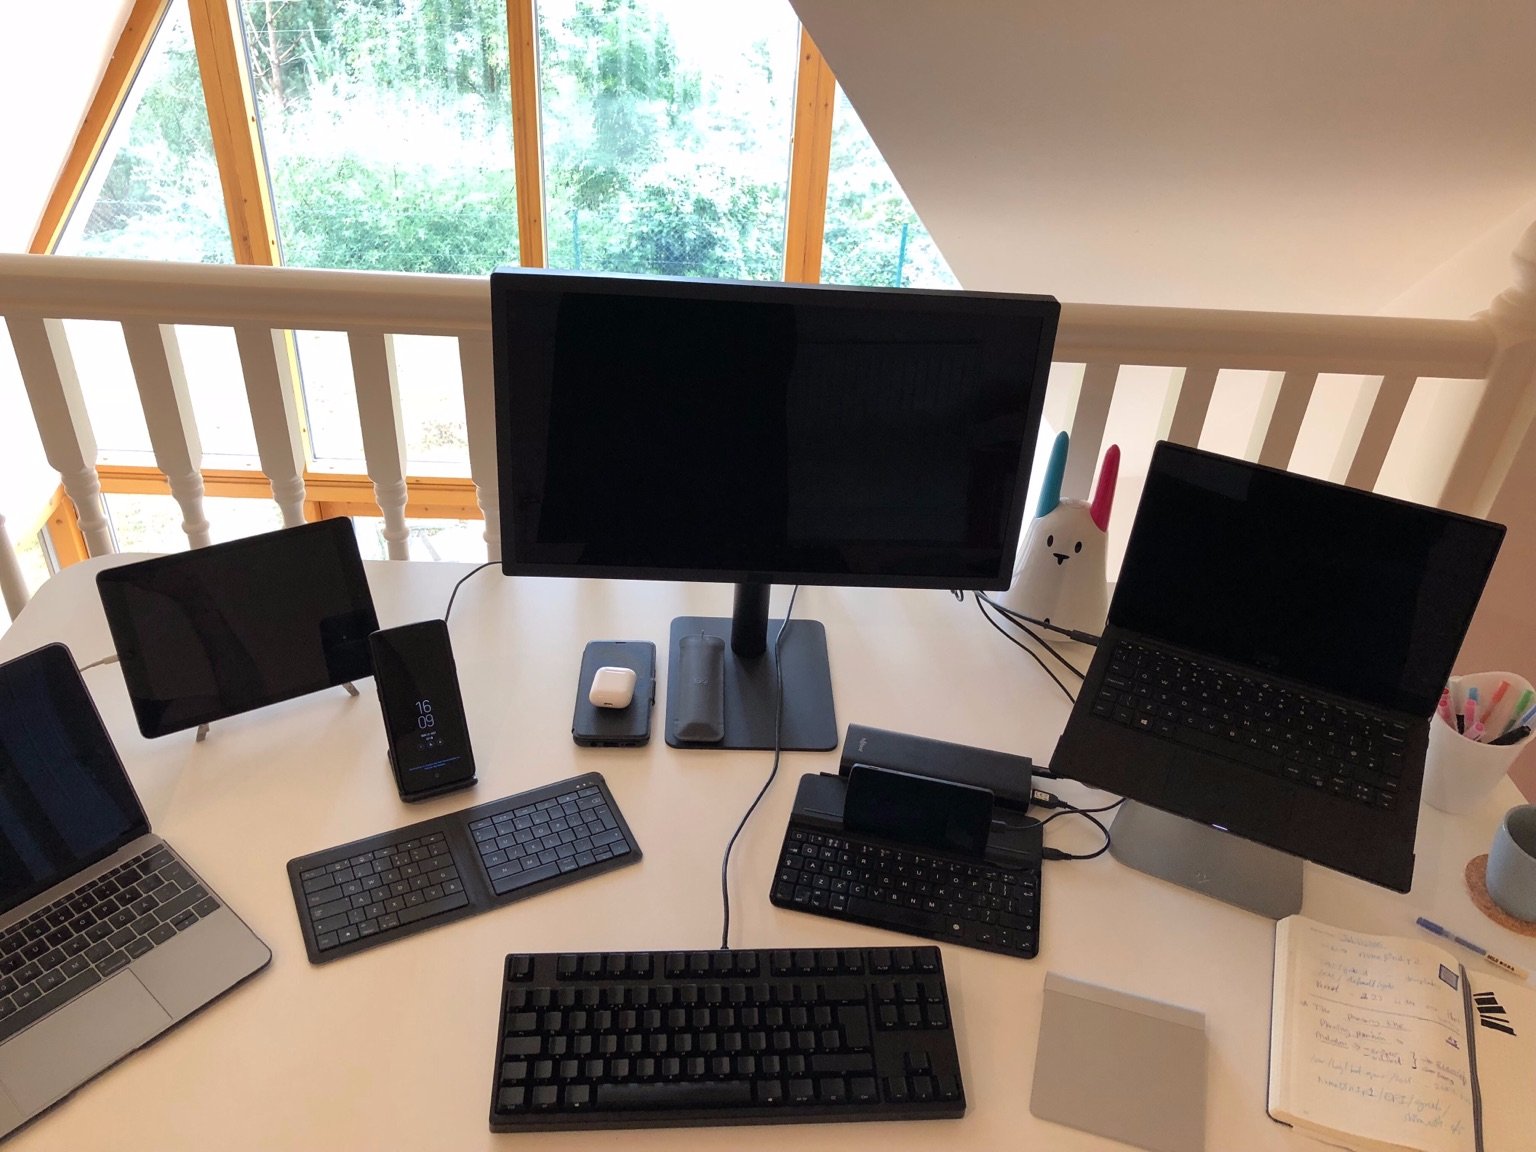 Photo of my desk showing a number of devices: from left to right, my MacBook, and iPad, a Samsung S9+ with a Microsoft foldable keyboard, a 21" LG monitor, a Filco Majestouch keyboard, a pair of AirPods in their case, a Logitech presentation remote in its gray leather sleeve, a Nexus 5 running LineageOS resting on a Logitech bluetooth keyboard originally for the iPad, a Magic Trackpad, and a Dell XPS 13 running Pop!_OS 18.04. All screens are off. Peeking from behind them is my Nabaztag bunny with one blue ear and one pink ear. To the far right, partially in the photo, is a pen holder with Muji pens, a coffee  mug, and my Leuchtturm notebook.